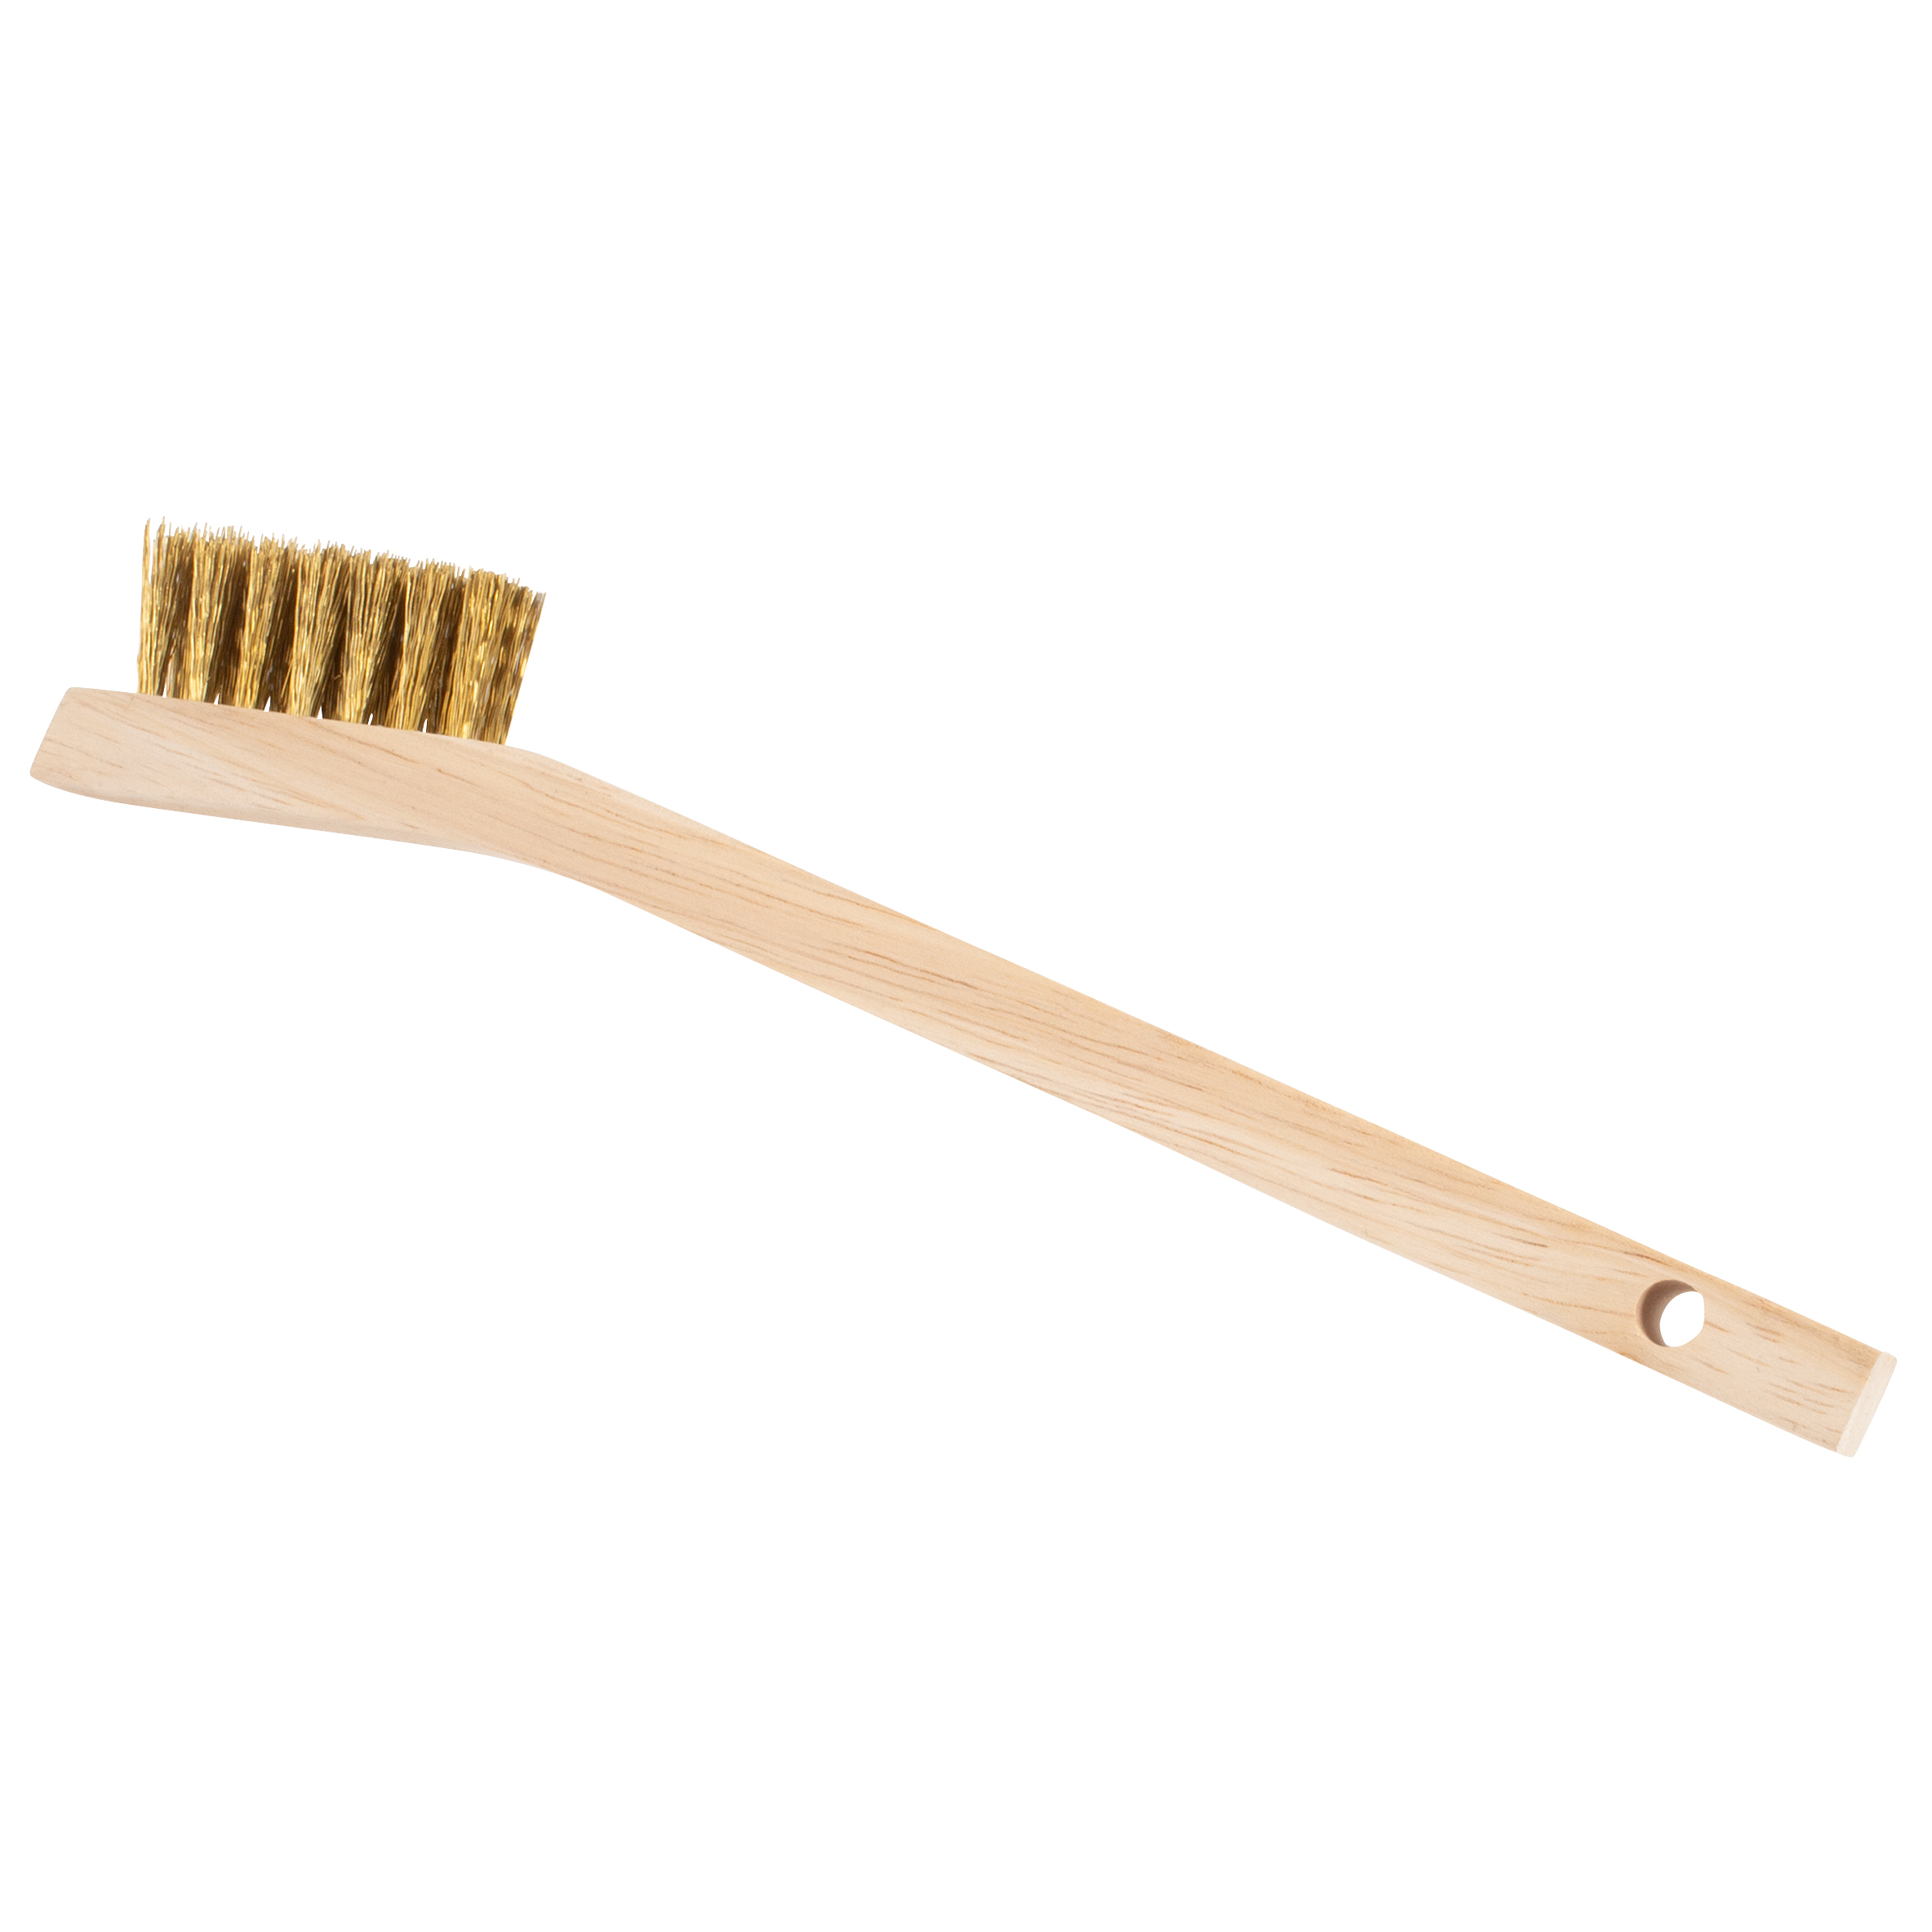 Small Brass Scratch Brush - 7 1/4 with Wooden Handle.